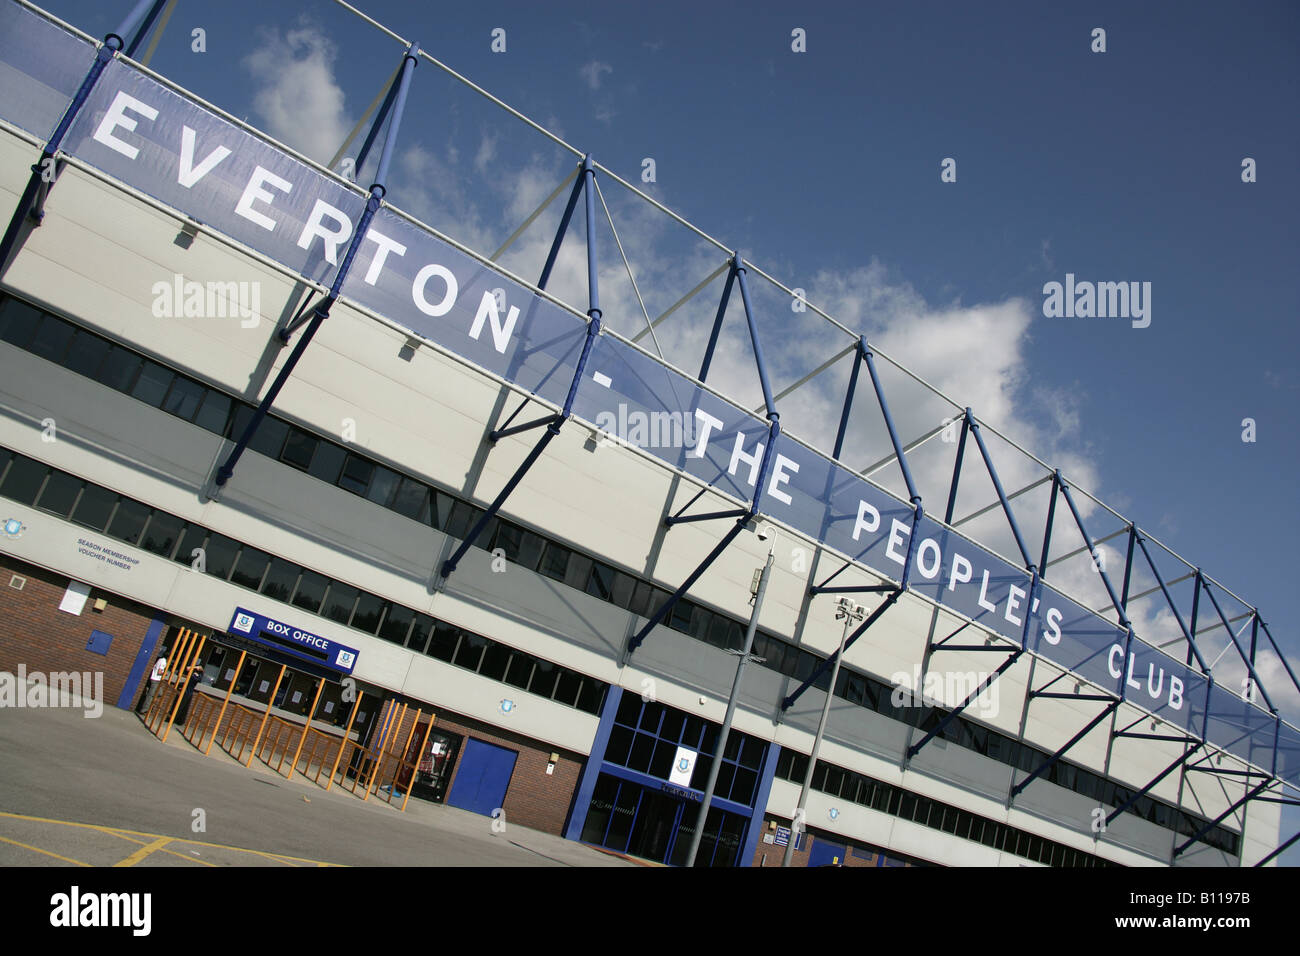 City of Liverpool, England. Angled view of the main stadium entrance to Goodison Park, home of Everton Football Club. Stock Photo